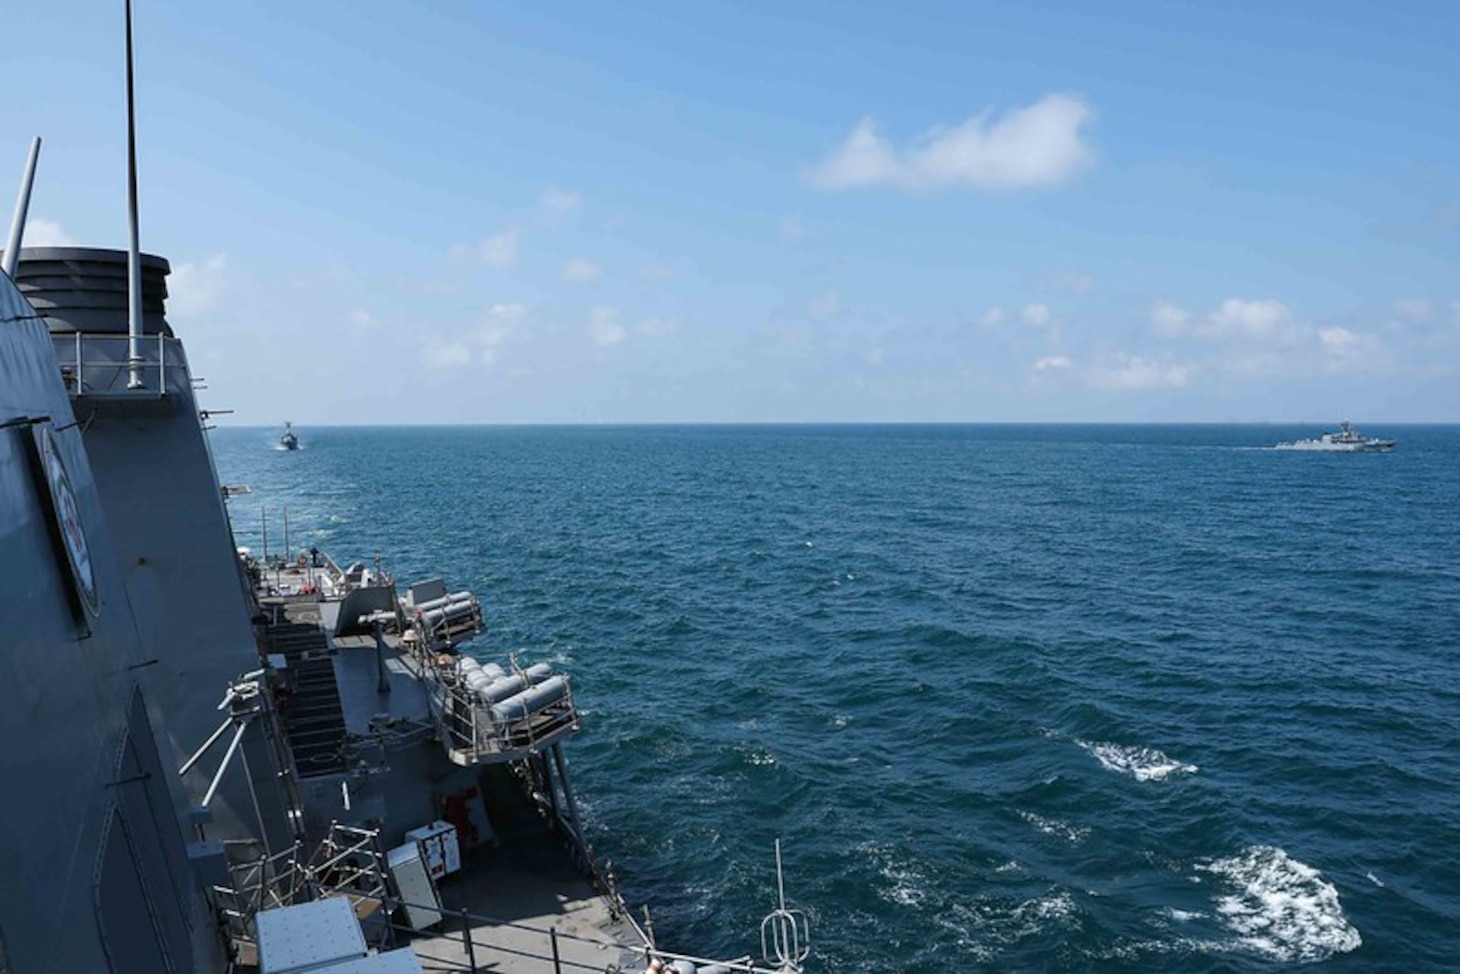 (July 14, 2021) The Arleigh Burke-class guided-missile destroyer USS Ross (DDG 71) moves in formation with ships participating the Bulgarian-led Exercise Breeze in the Black Sea, July 14, 2021. Ross, forward-deployed to Rota, Spain, is on patrol in the U.S. Sixth Fleet area of operations in support of regional allies and partners and U.S. national security interests in Europe and Africa. (U.S. Navy photo by Mass Communication Specialist 2nd Class Claire DuBois/Released)